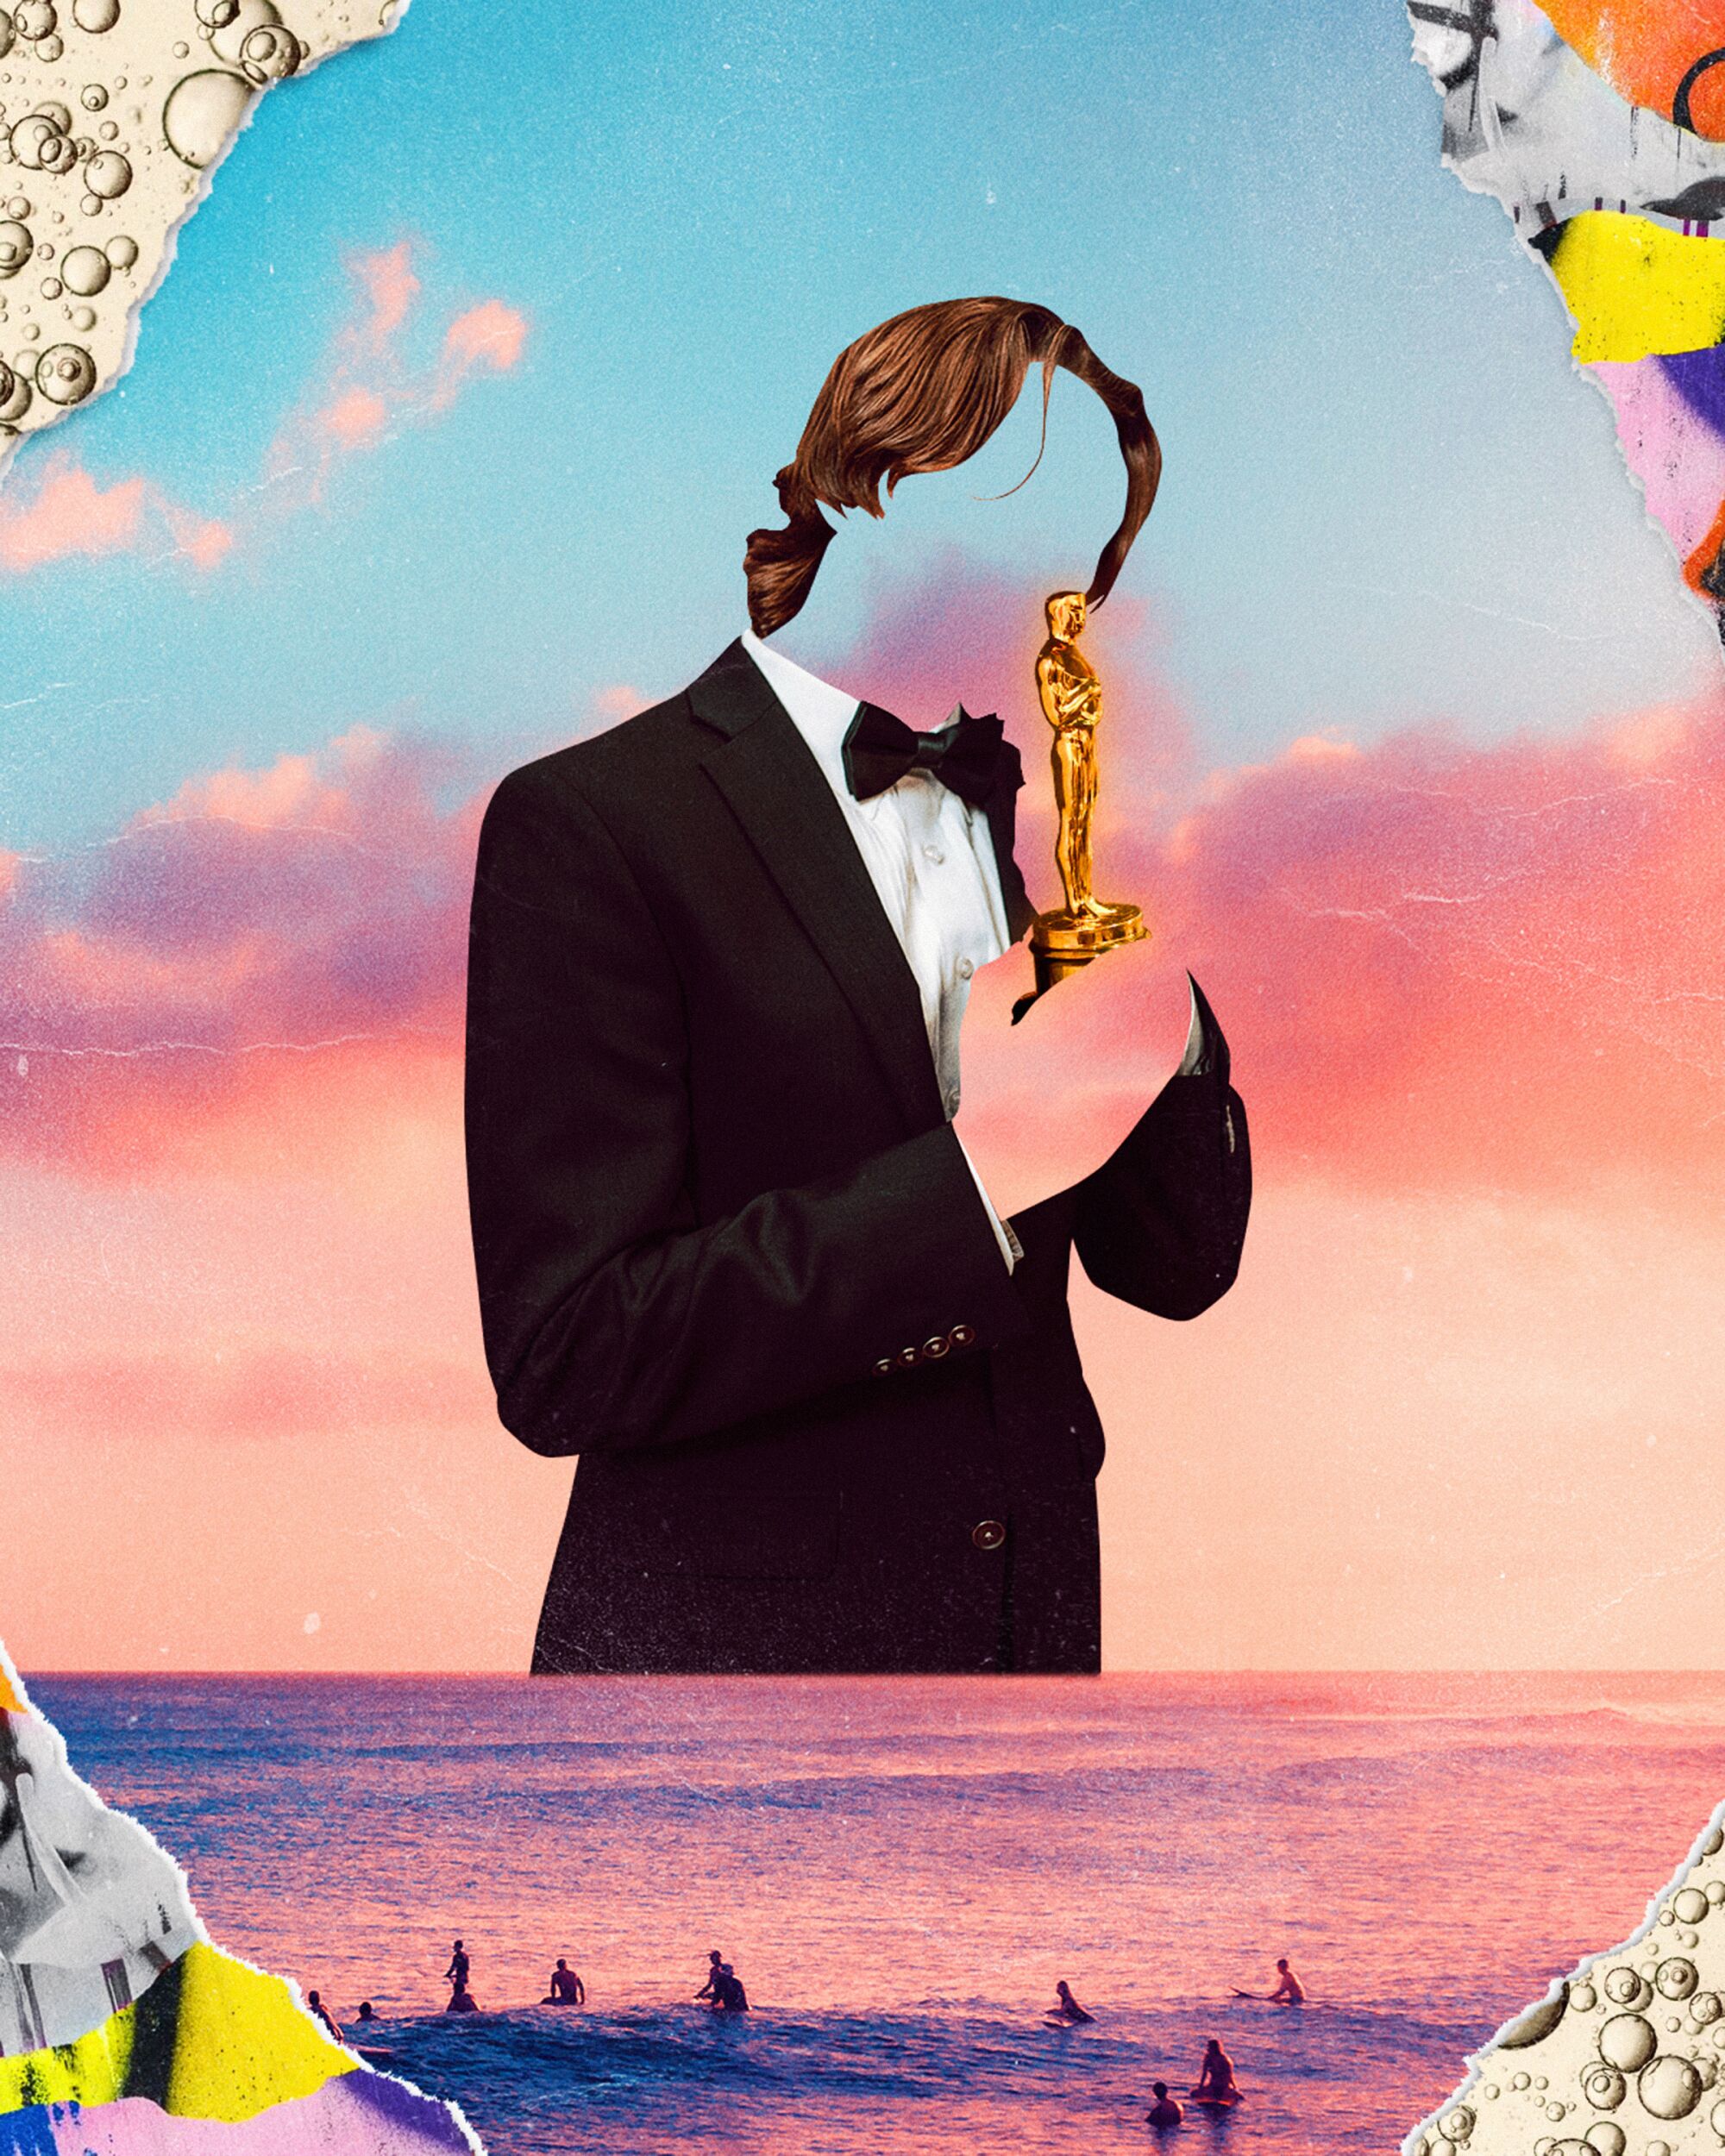 collage cutout of a faceless person wearing a black bow tie and tuxedo jacket in front of an ocean sunset, holding an Oscar